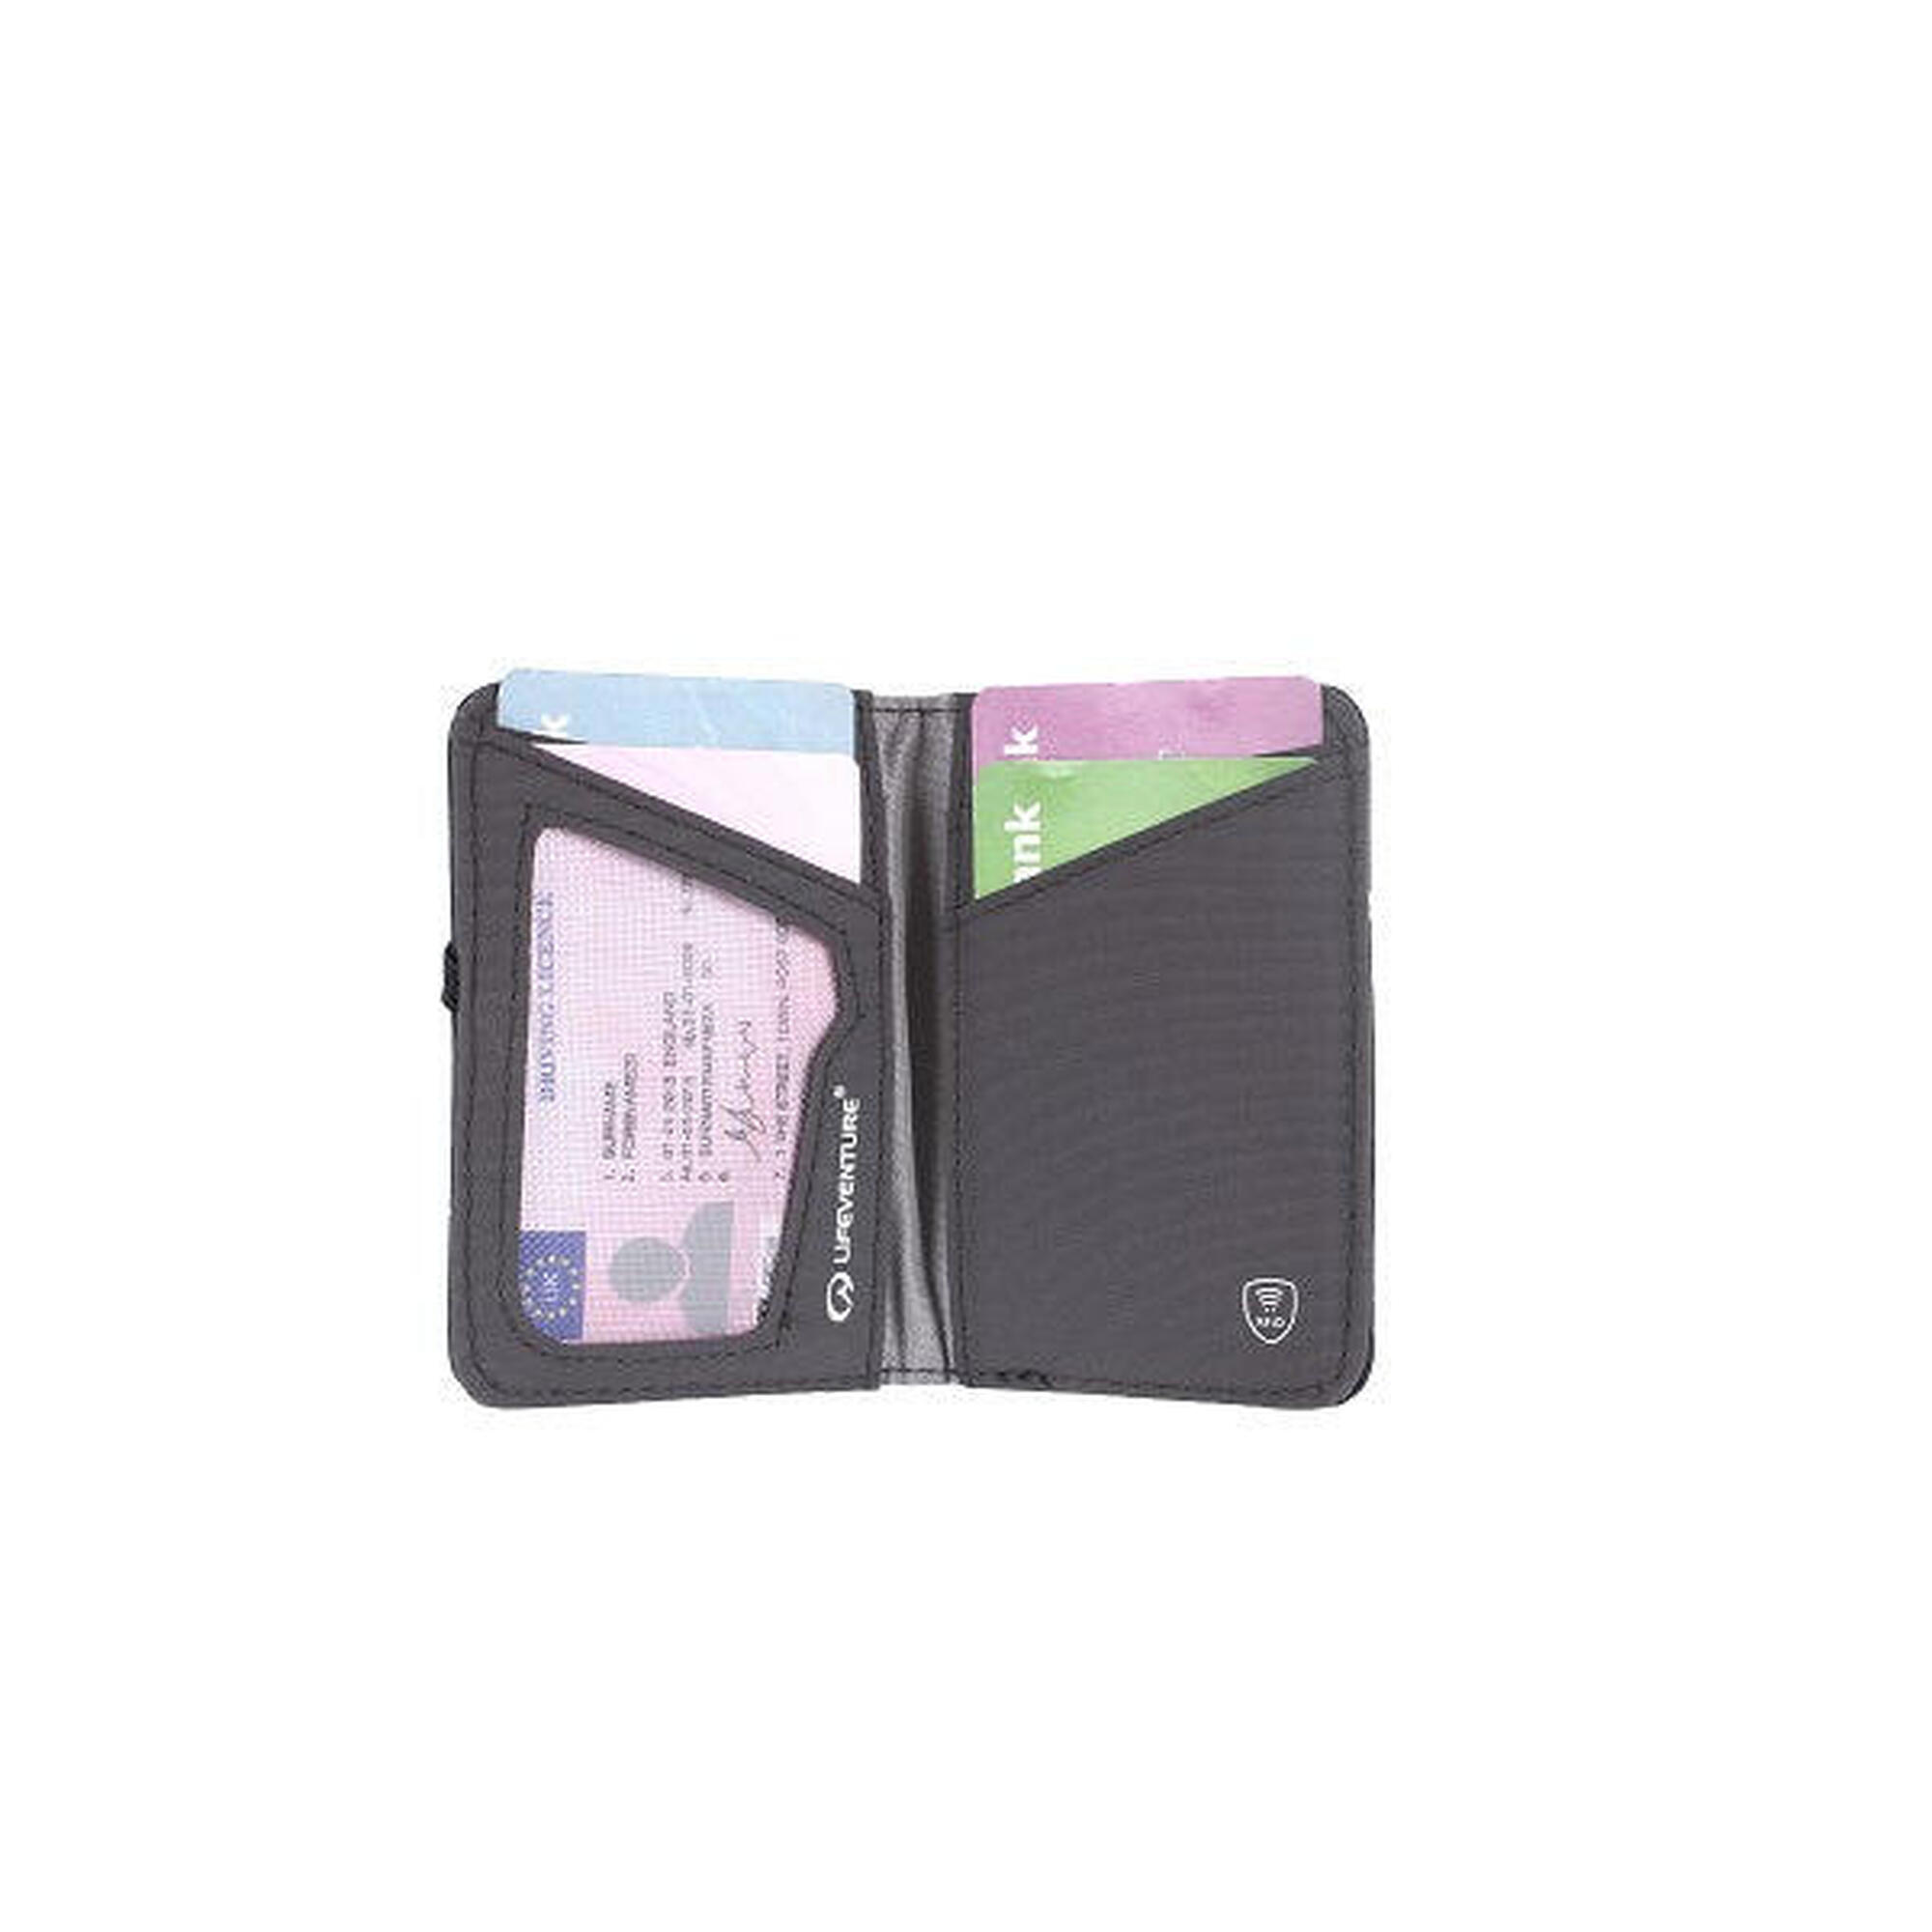 RFID Card Recycled Wallet - Blue